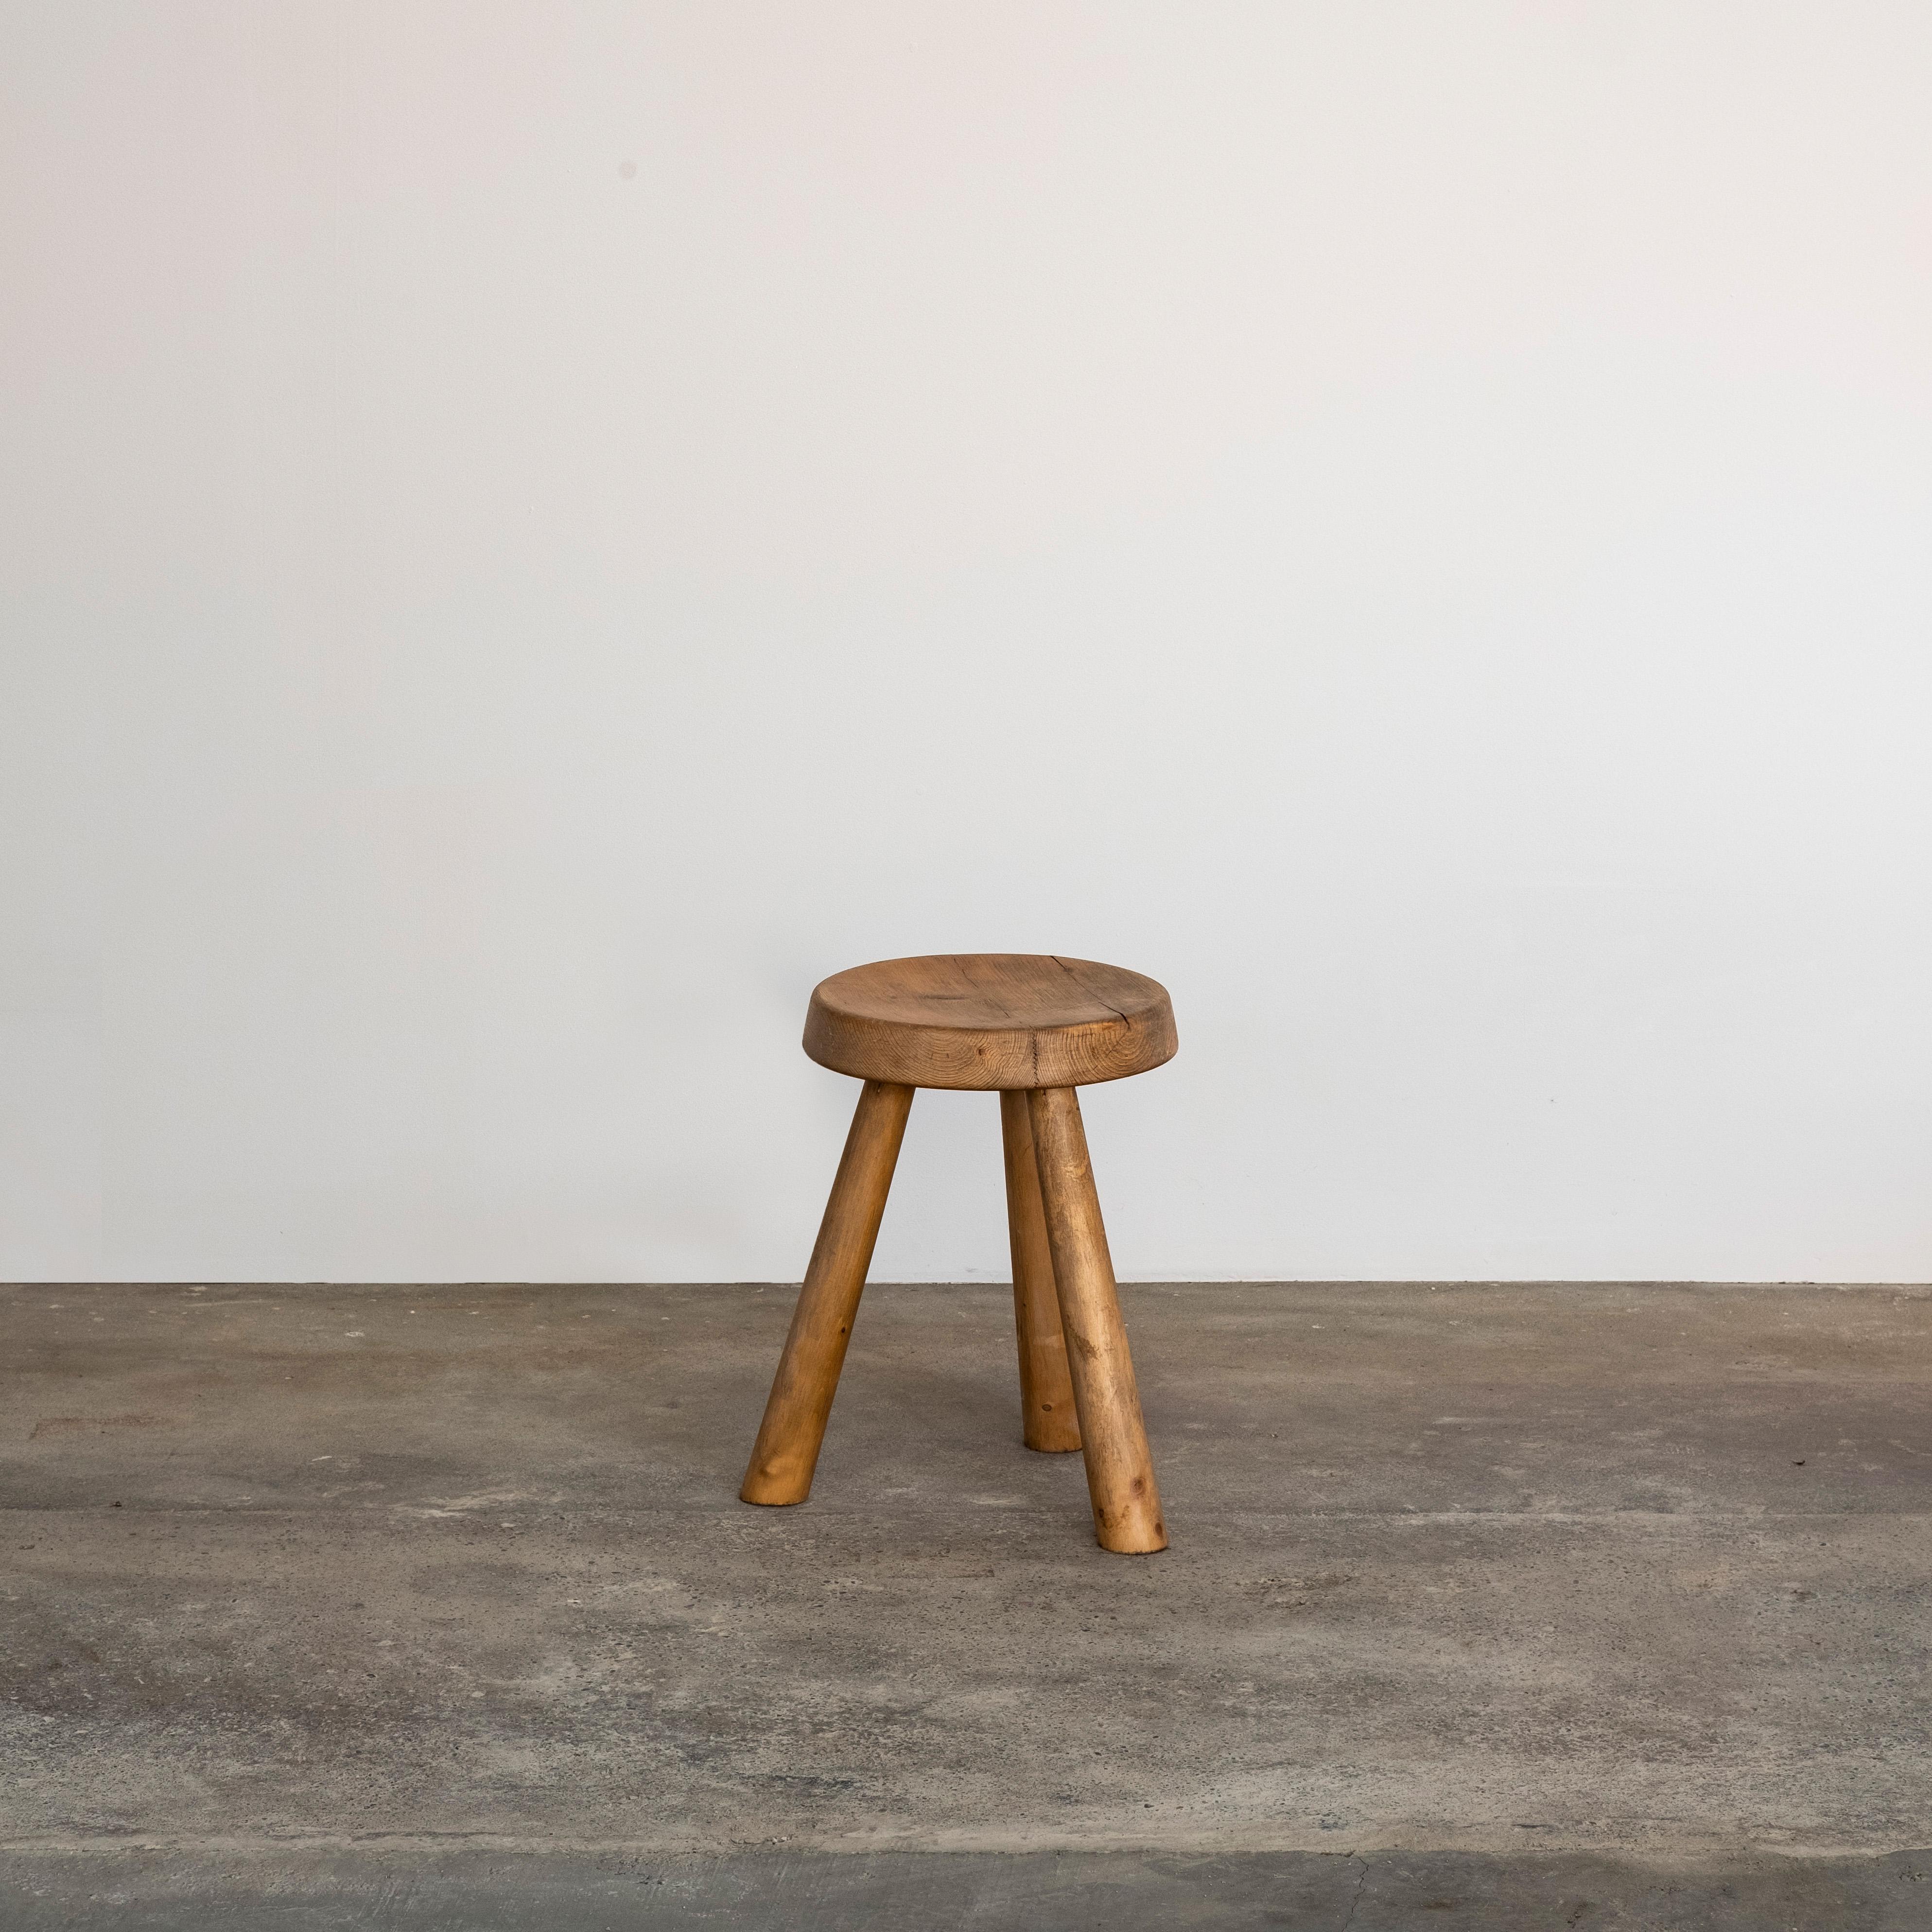 Charlotte Perriand counts as one of the masters of French modernist design together with Le Corbusier, Jean Prouvé or Pierre Jeanneret. Her works are highly valued until present time and have become design classics.
This stool is a raw but and